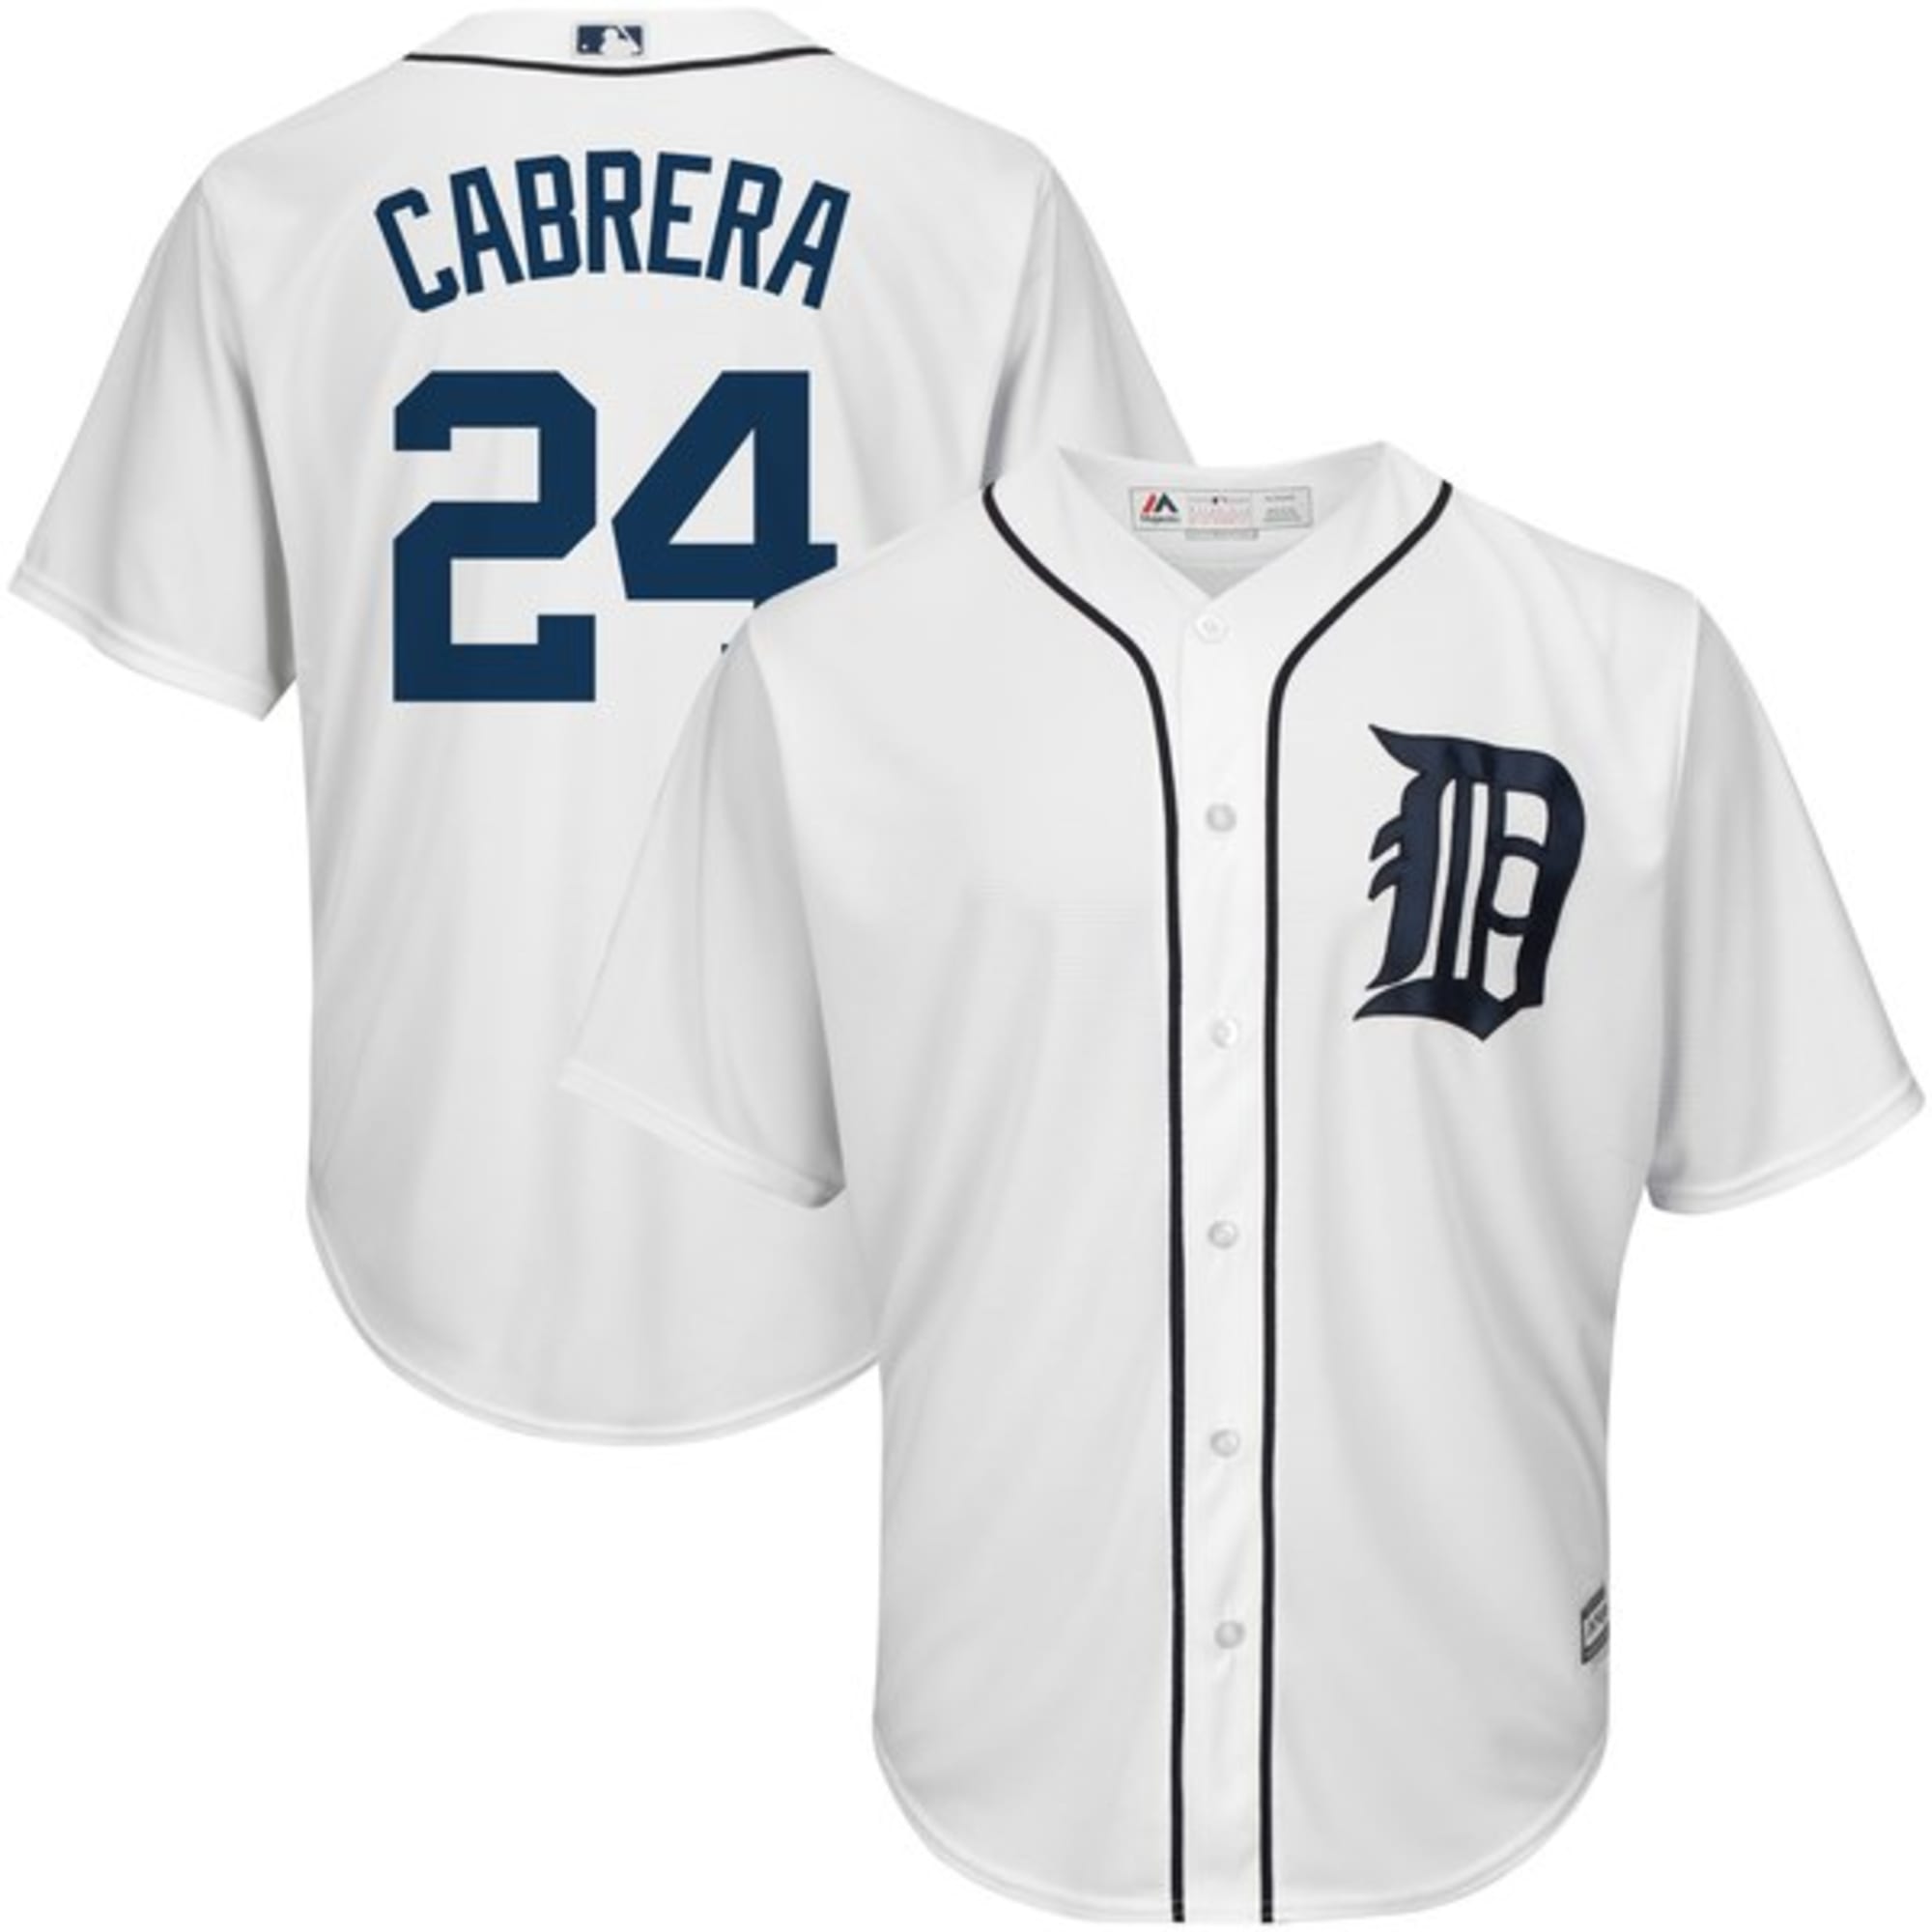 detroit tigers spring training jersey